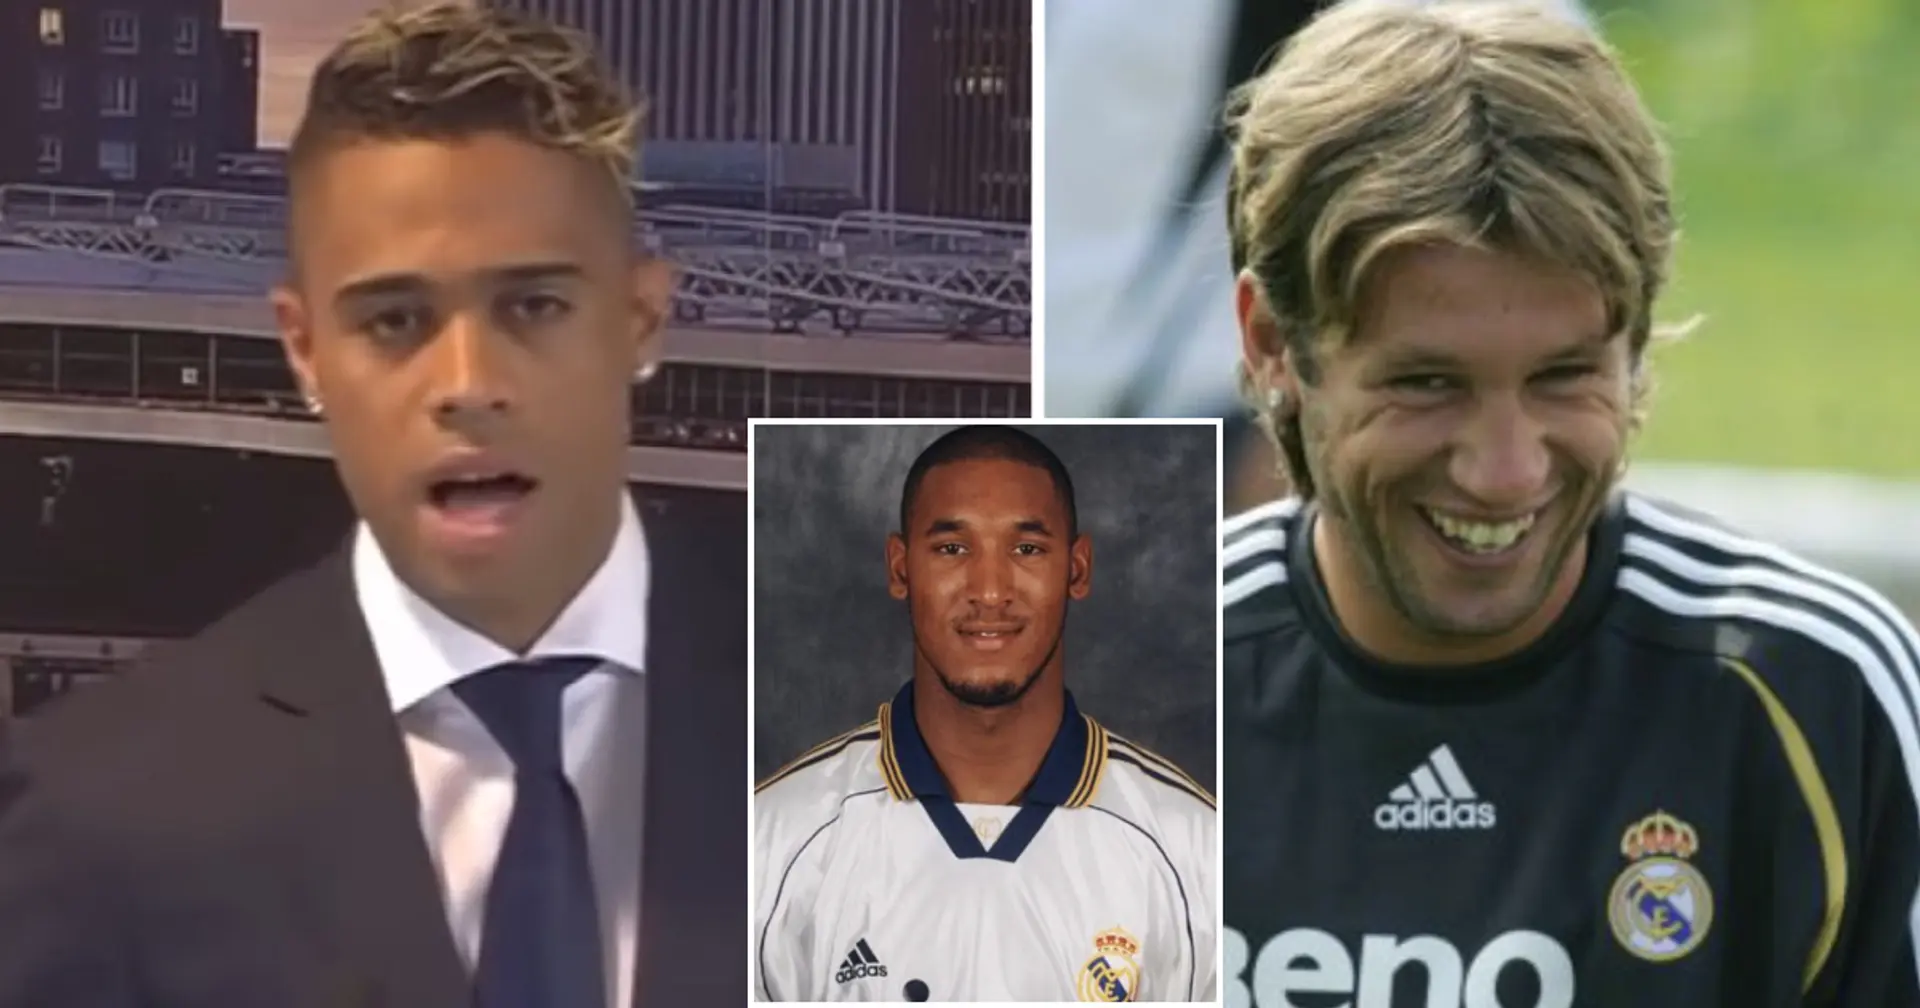 Spanish newspaper lists 10 worst forwards in Real Madrid history -- Mariano overlooked